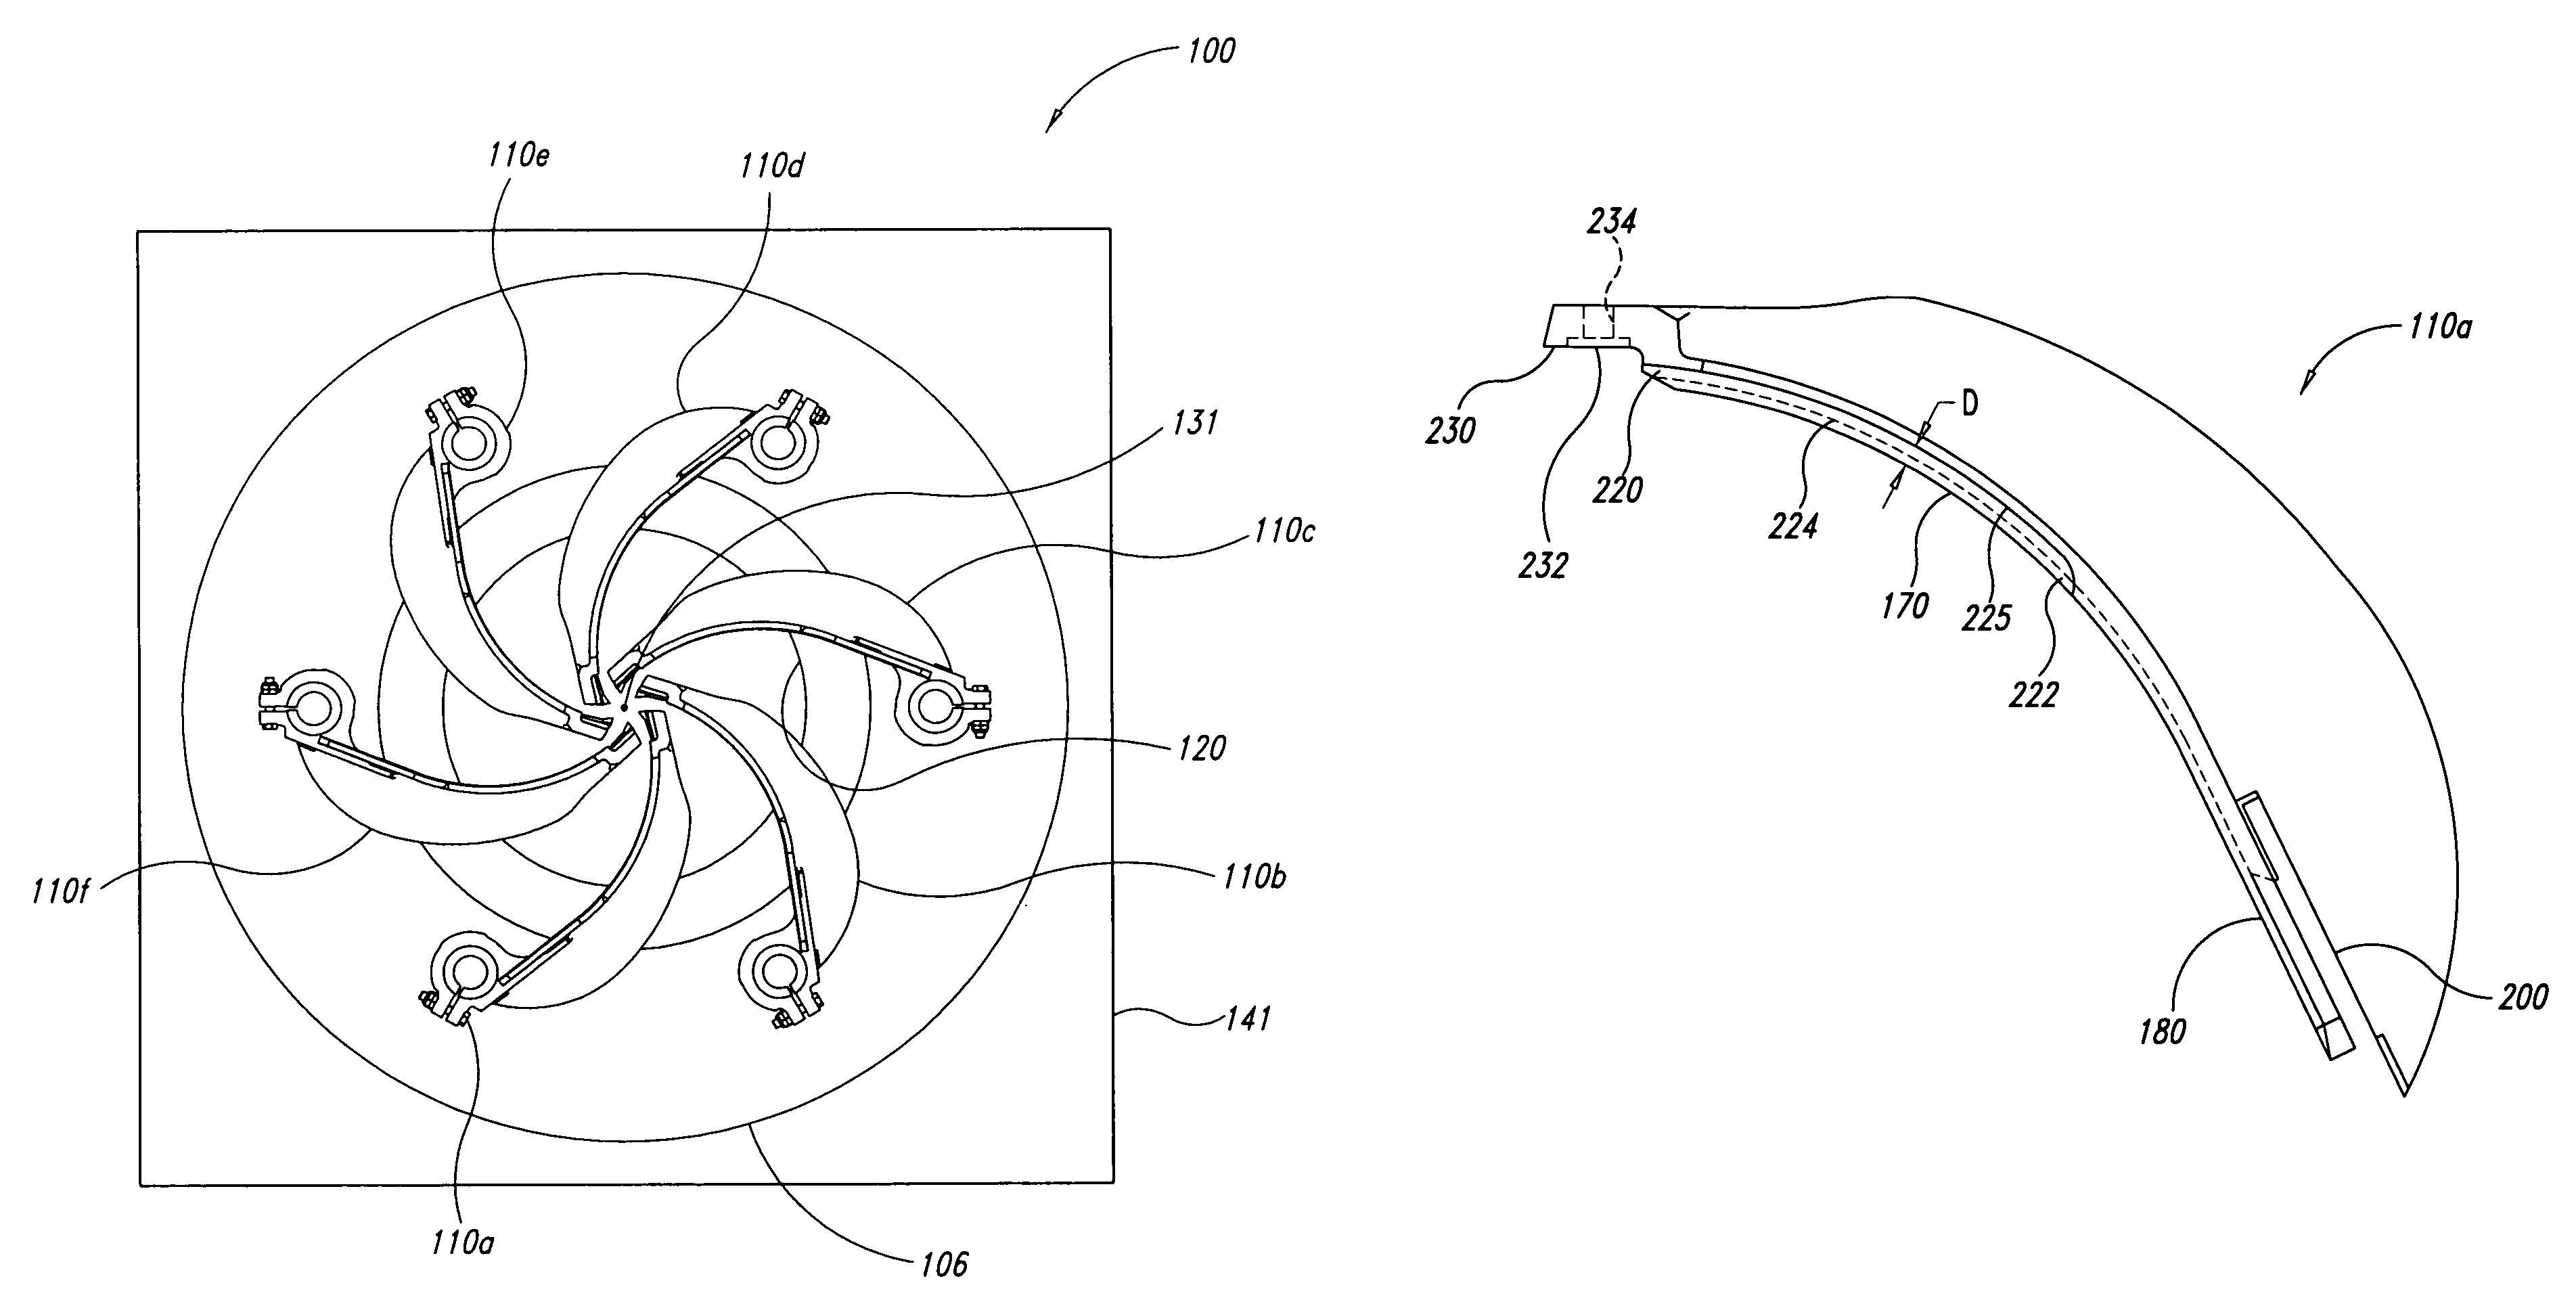 Swing arm assembly with replaceable insert for use with a debarker apparatus